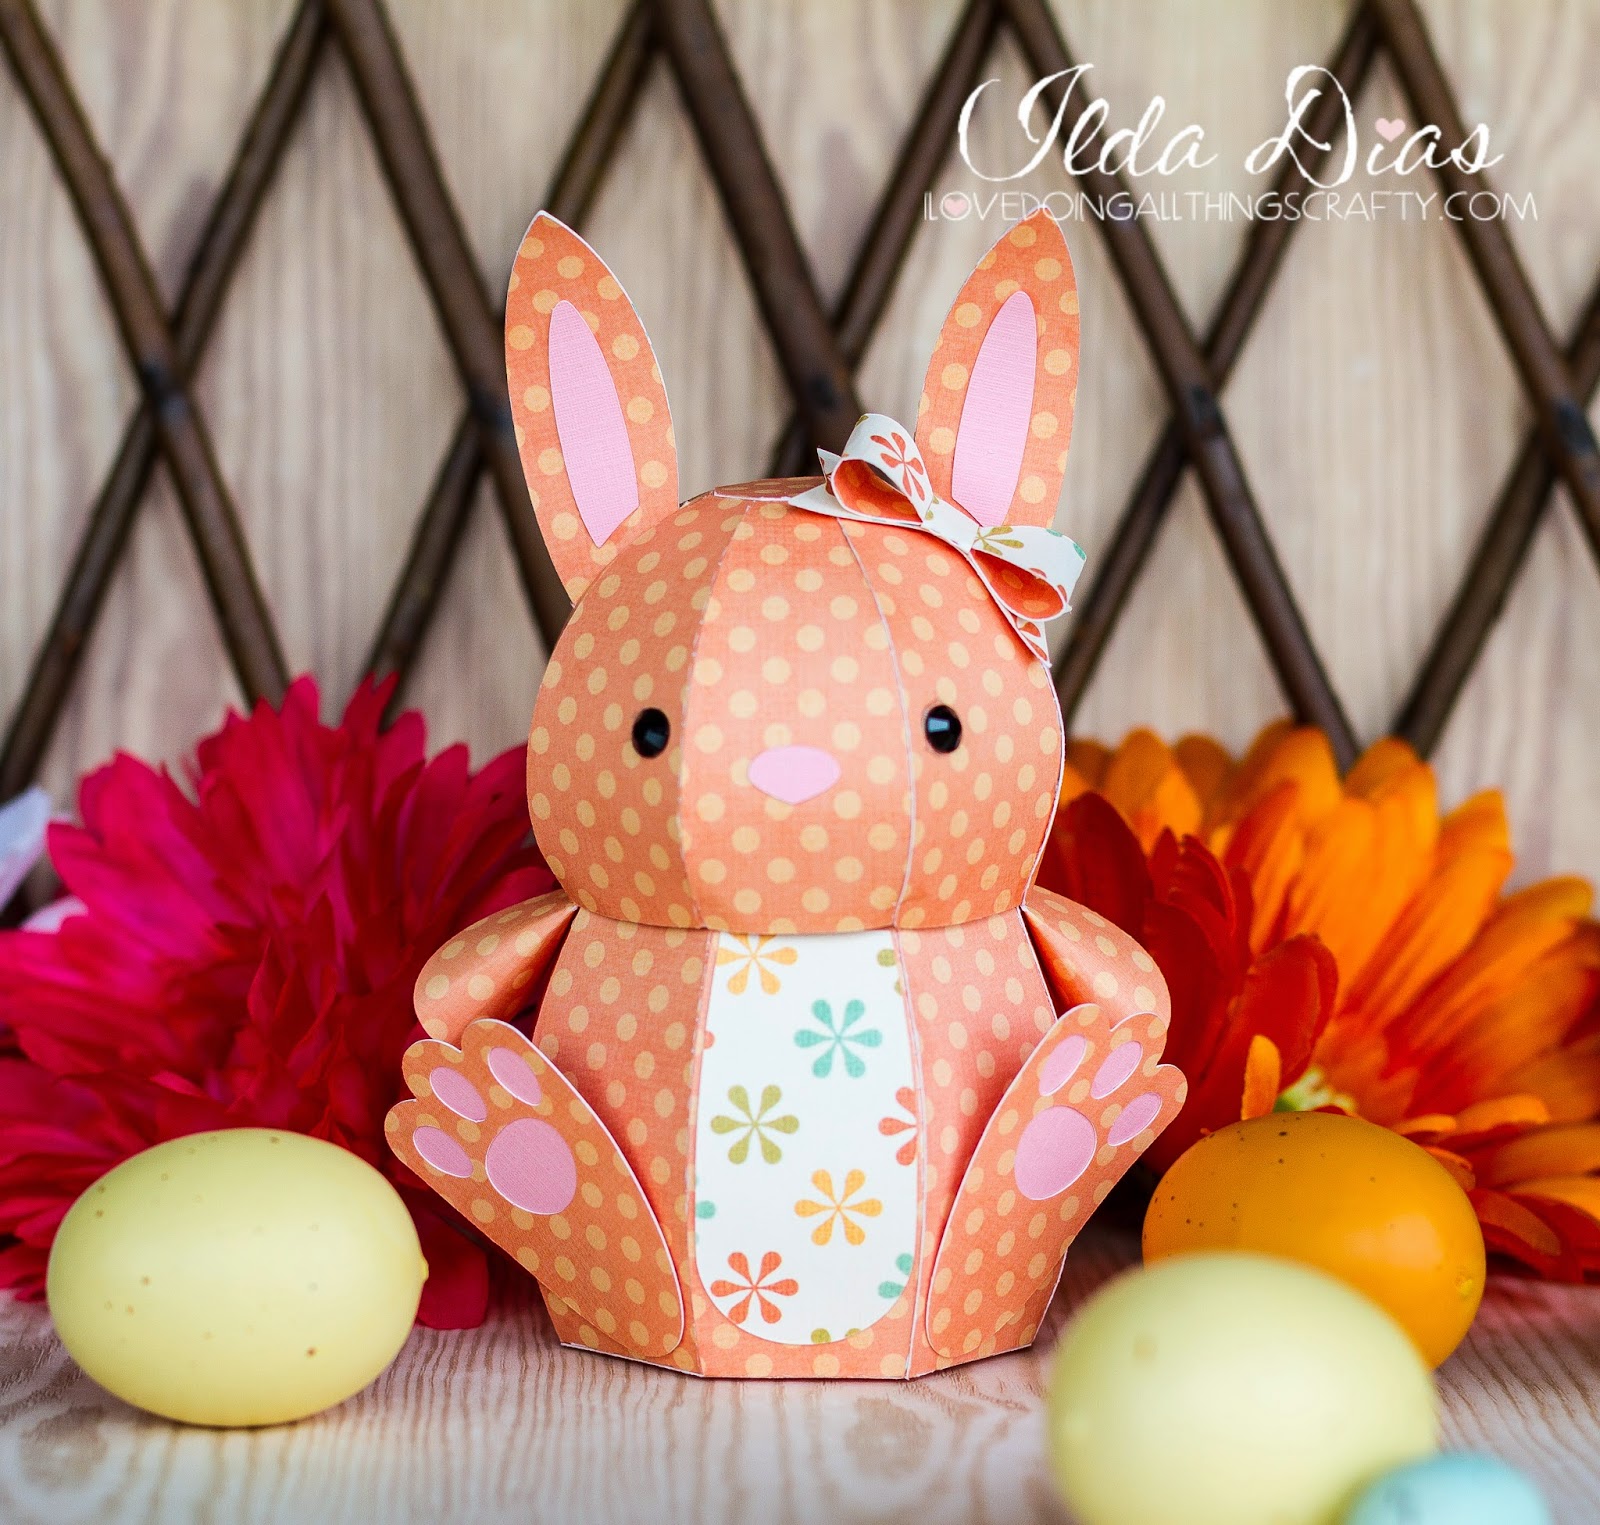 Download I Love Doing All Things Crafty: 3D Paper Easter Bunny